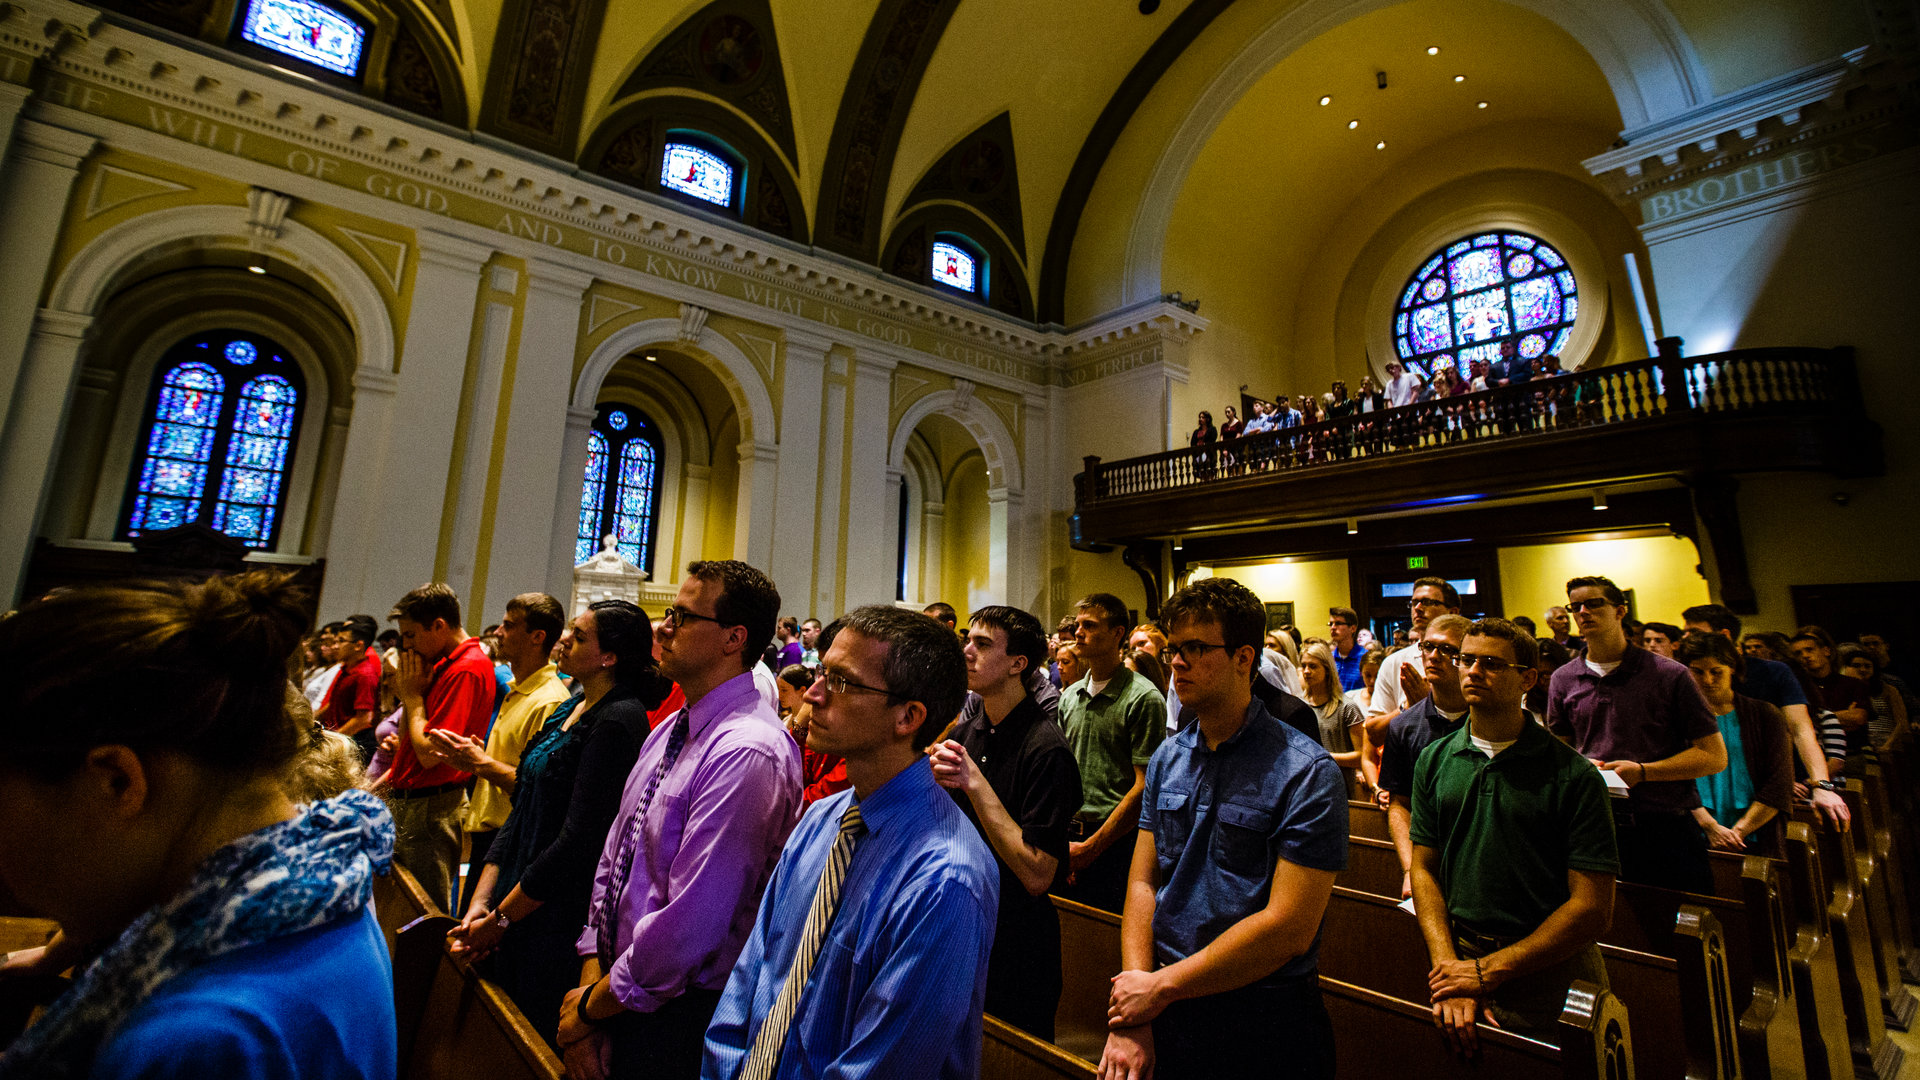 parishioners during mass in the chapel of St. Thomas Aquinas